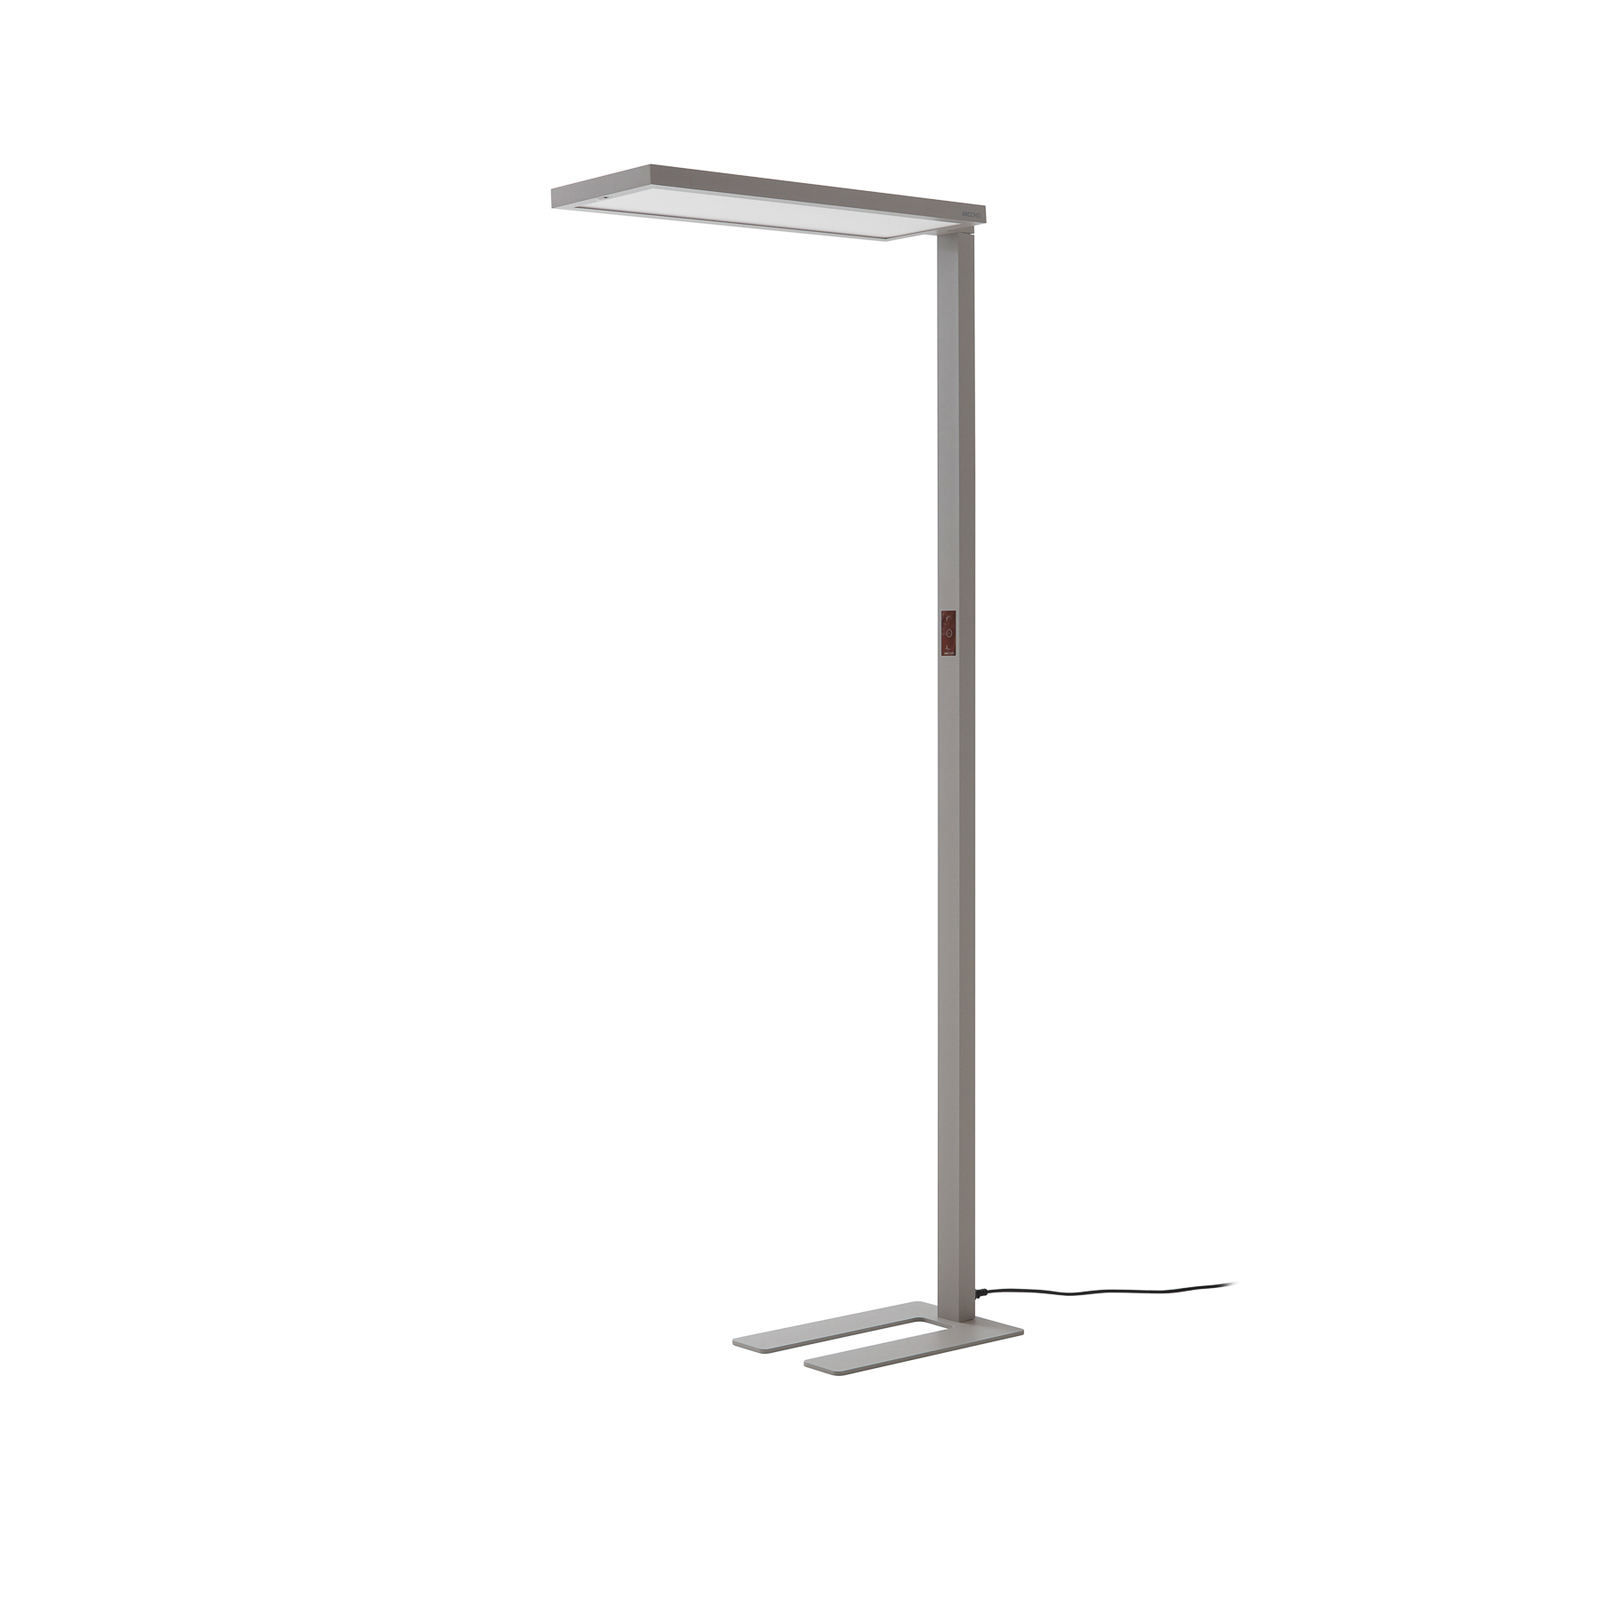 Arcchio Finix LED floor lamp silver 100 W dimmable